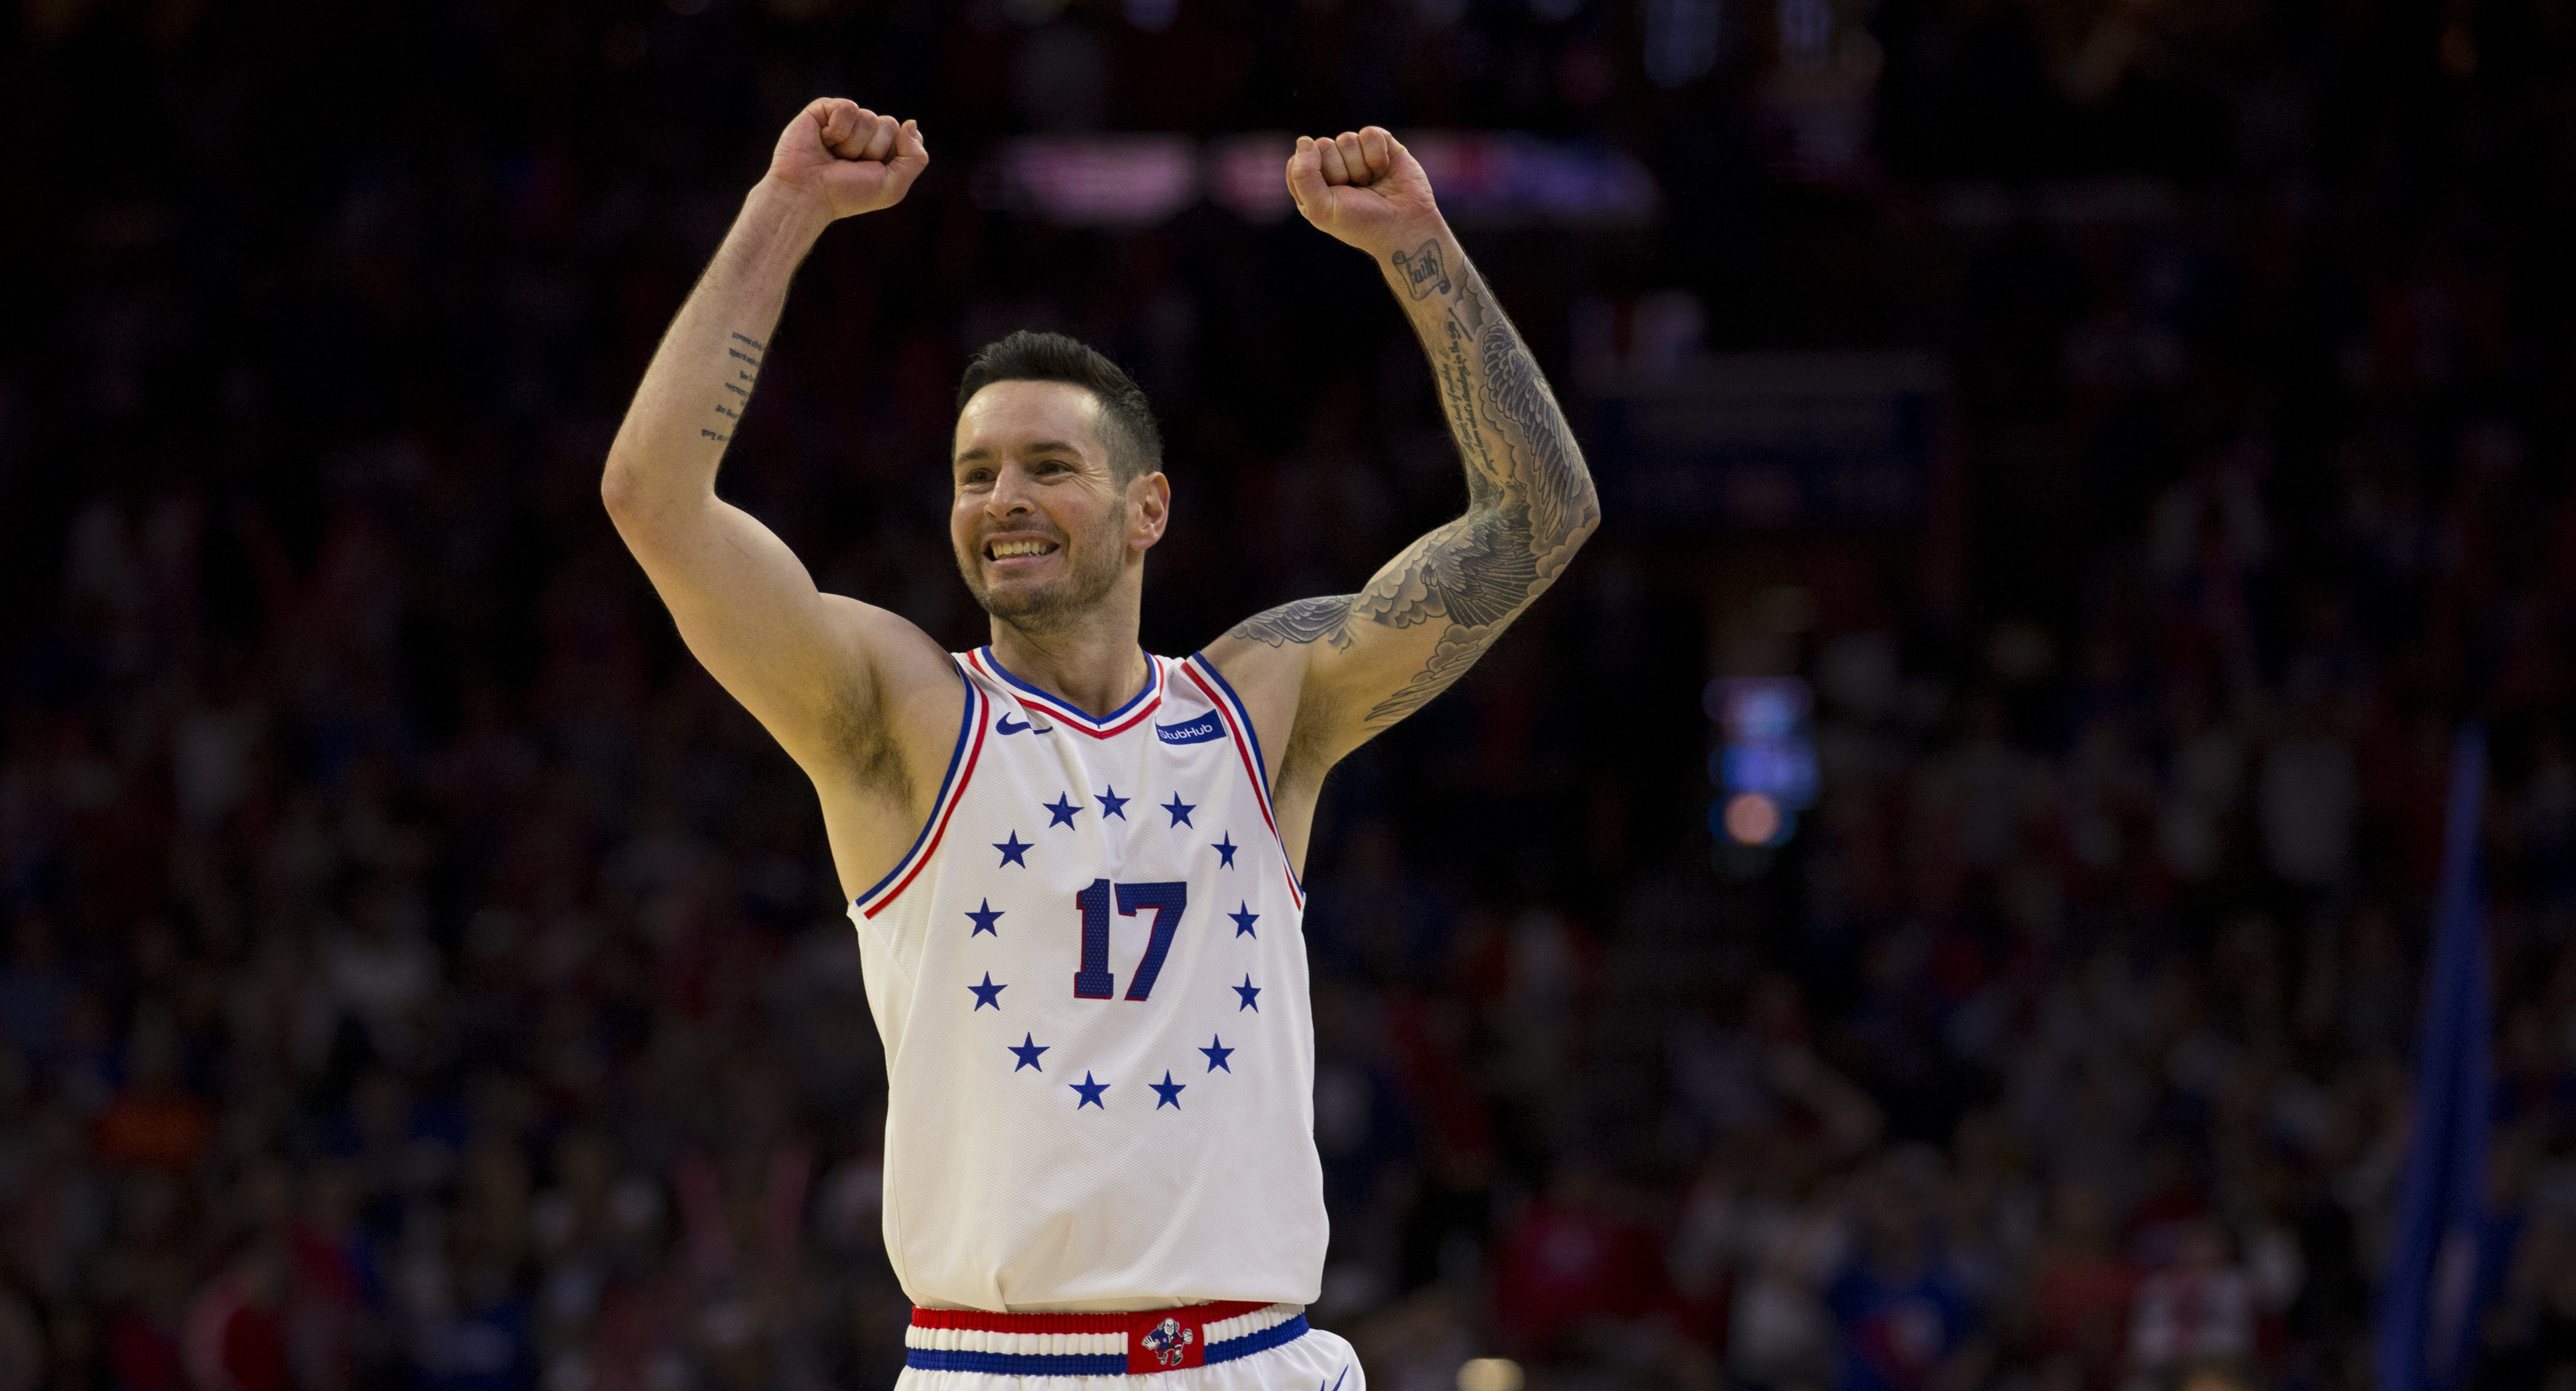 JJ Redick reacts to his best plays from Duke and the NBA